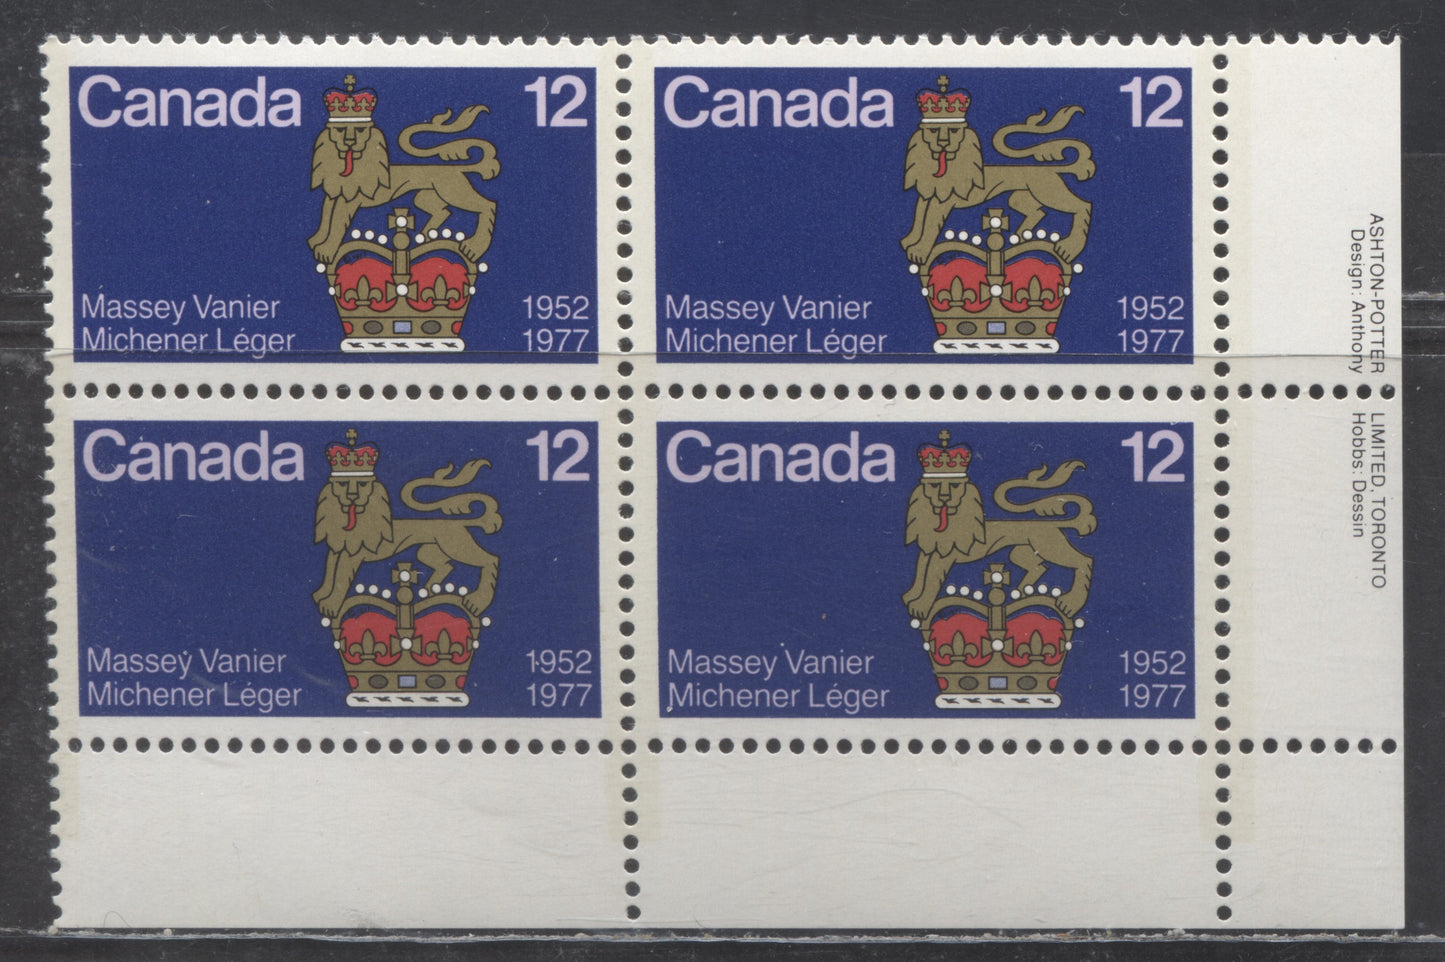 Lot 454 Canada #735var 12c Multicolored Governor General's Standard, 1977 Canadian Governors General Issue, A VFNH LR Block Of 4 With Dot Above V Of Vanier (Pos. 50), DF1/DF1 Paper